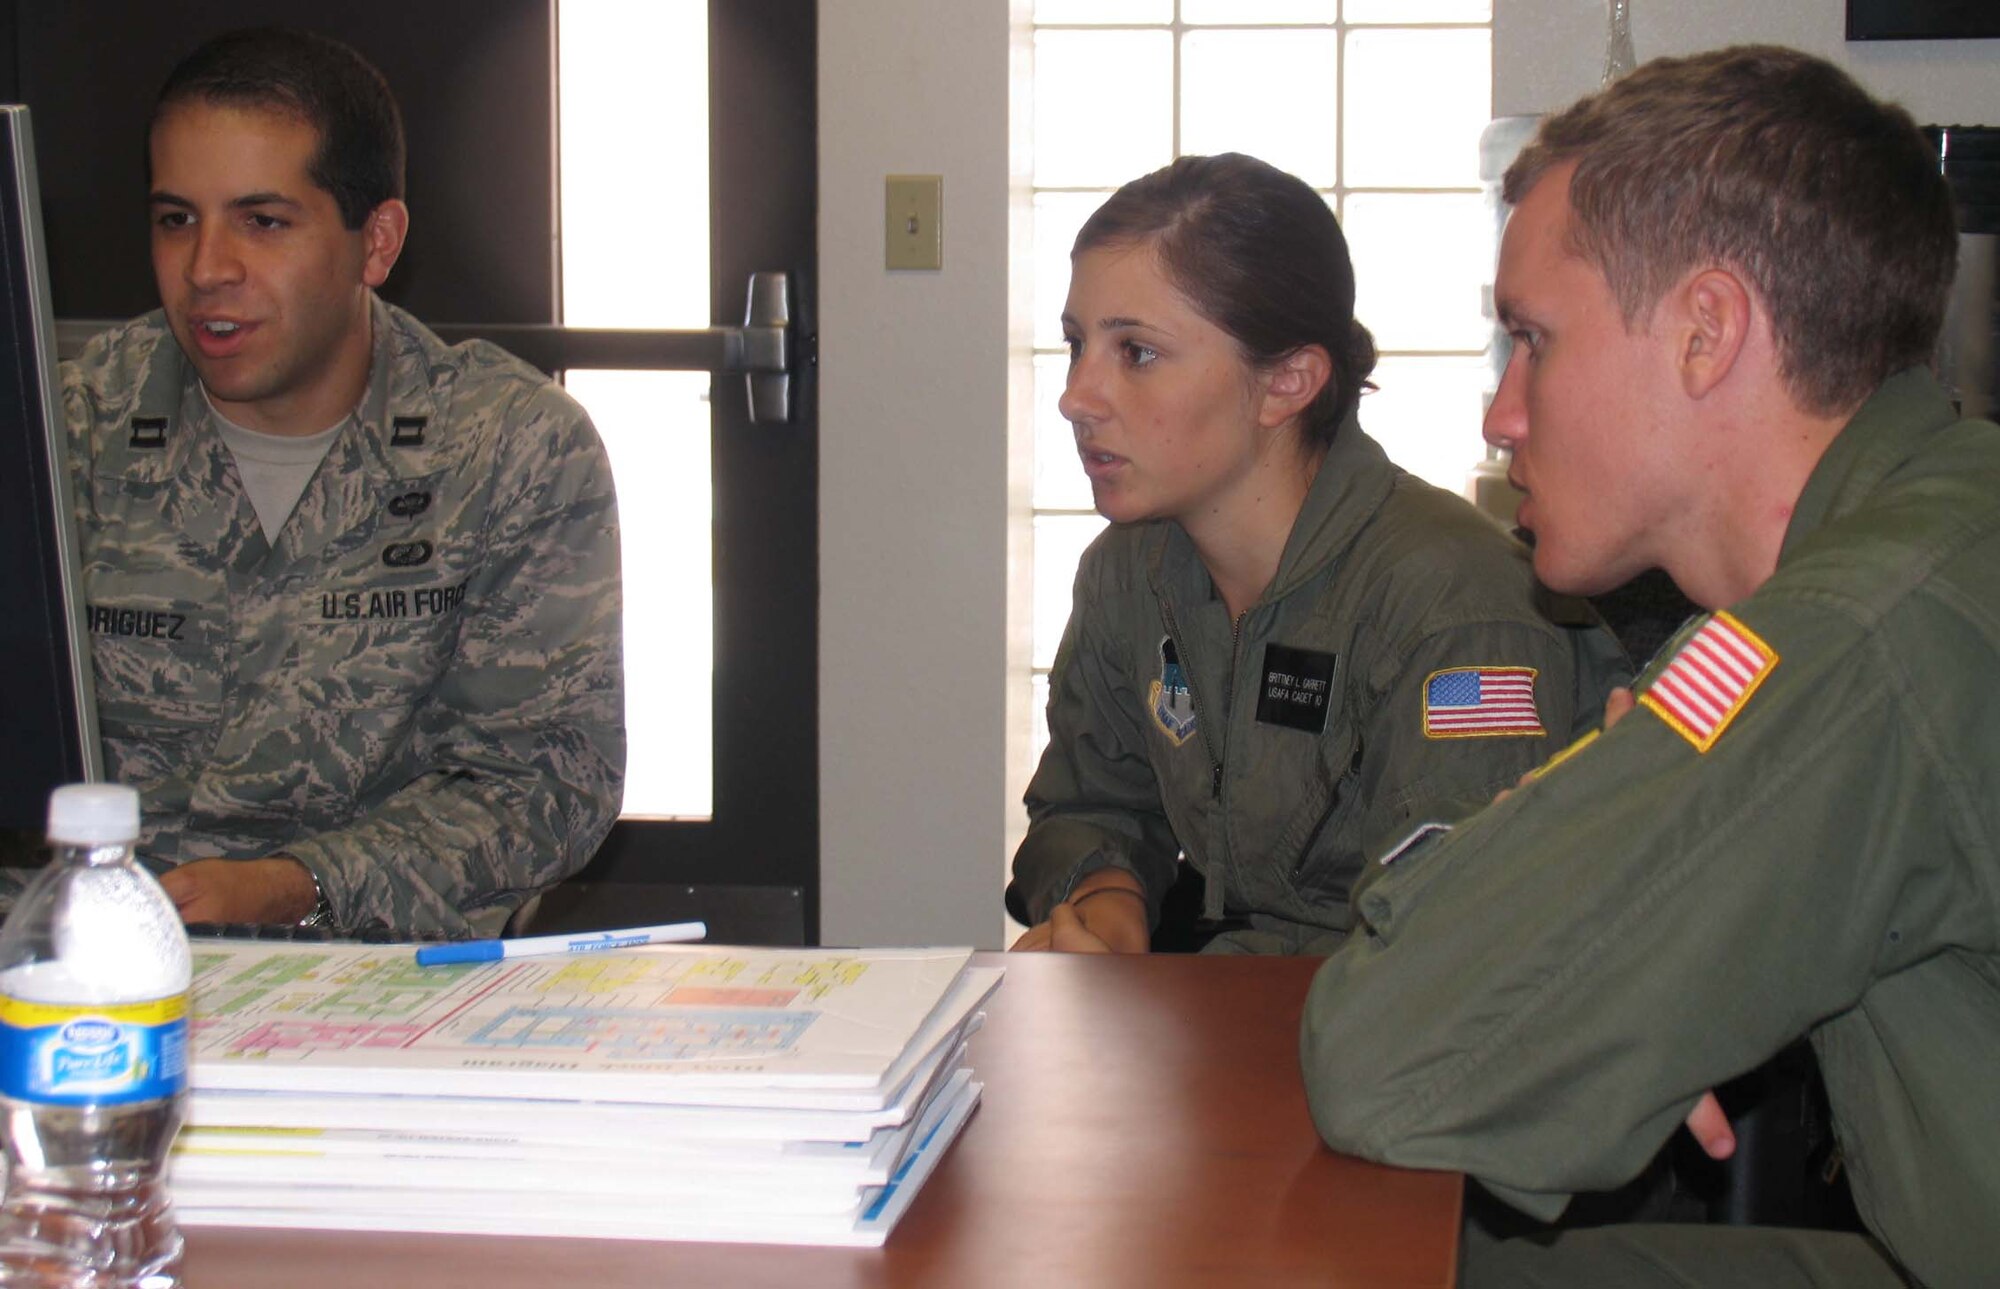 (Left to right) Capt. James Rodriguez from the Air Force Operational Test and Evaluation Center’s Detachment 3 at Kirtland Air Force Base, N.M., works with Cadets First Class Brittney Garrett and Mark Price as they analyze questionnaire and reliability data for the Department of Defense National Airspace System during the U.S. Air Force Academy’s Cadet Summer Research Program. During the five-week program, cadets gained hands-on exposure to operational testing processes, products, and experiences. (U.S. Air Force photo).